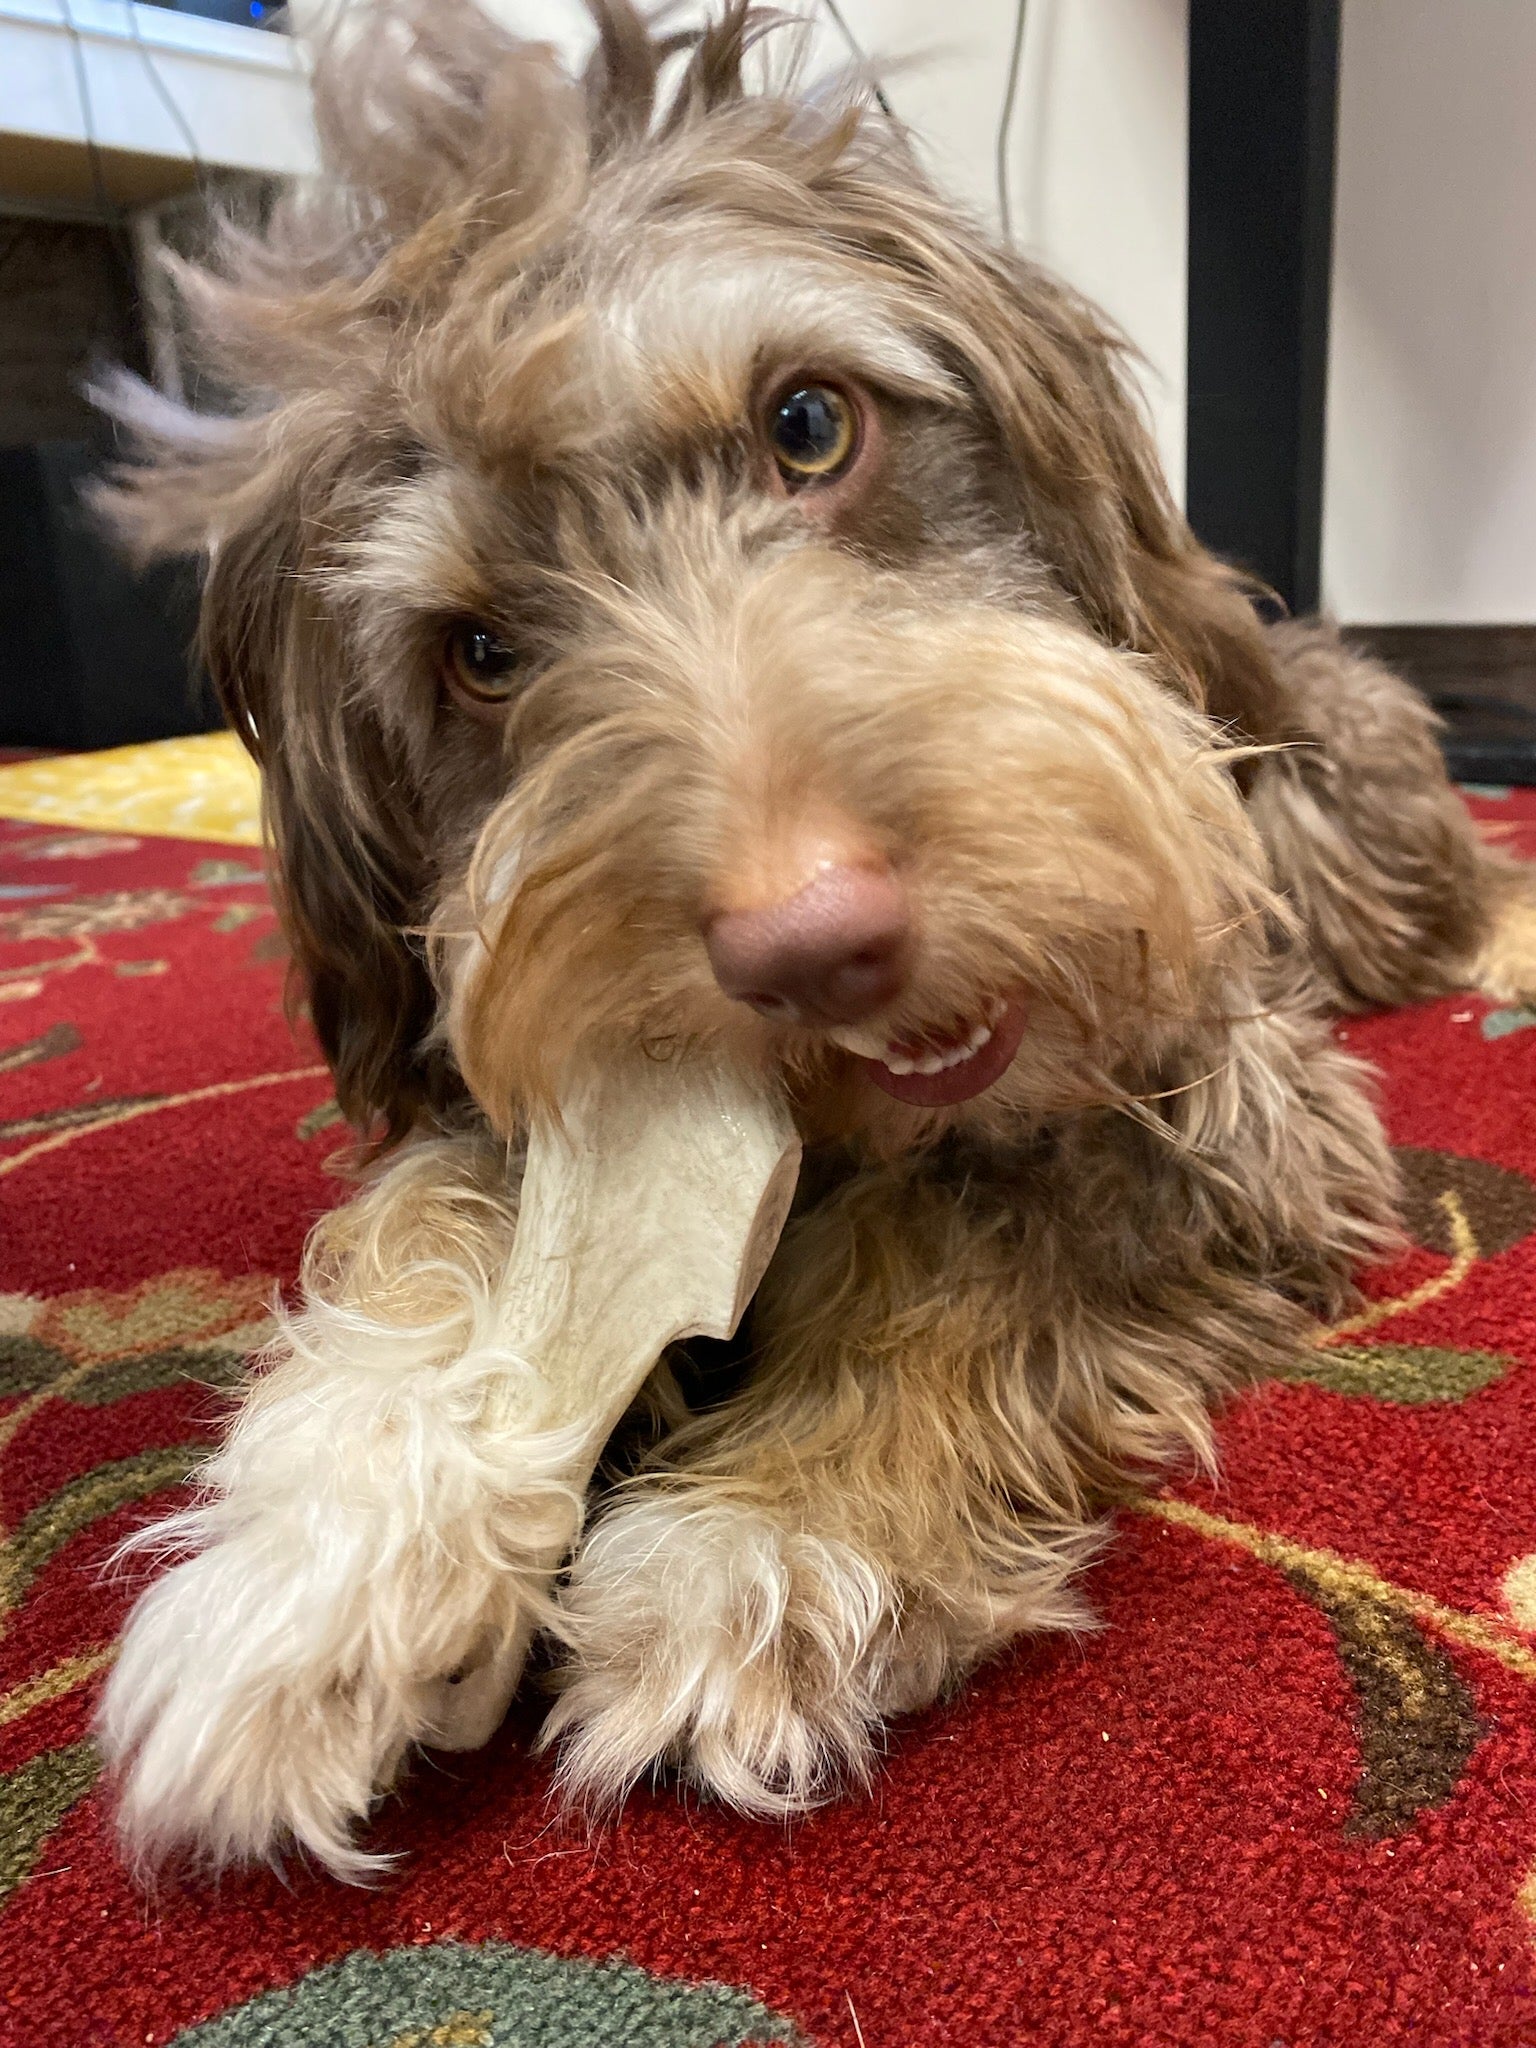 Dog chewing on an antler while laying on a red carpet